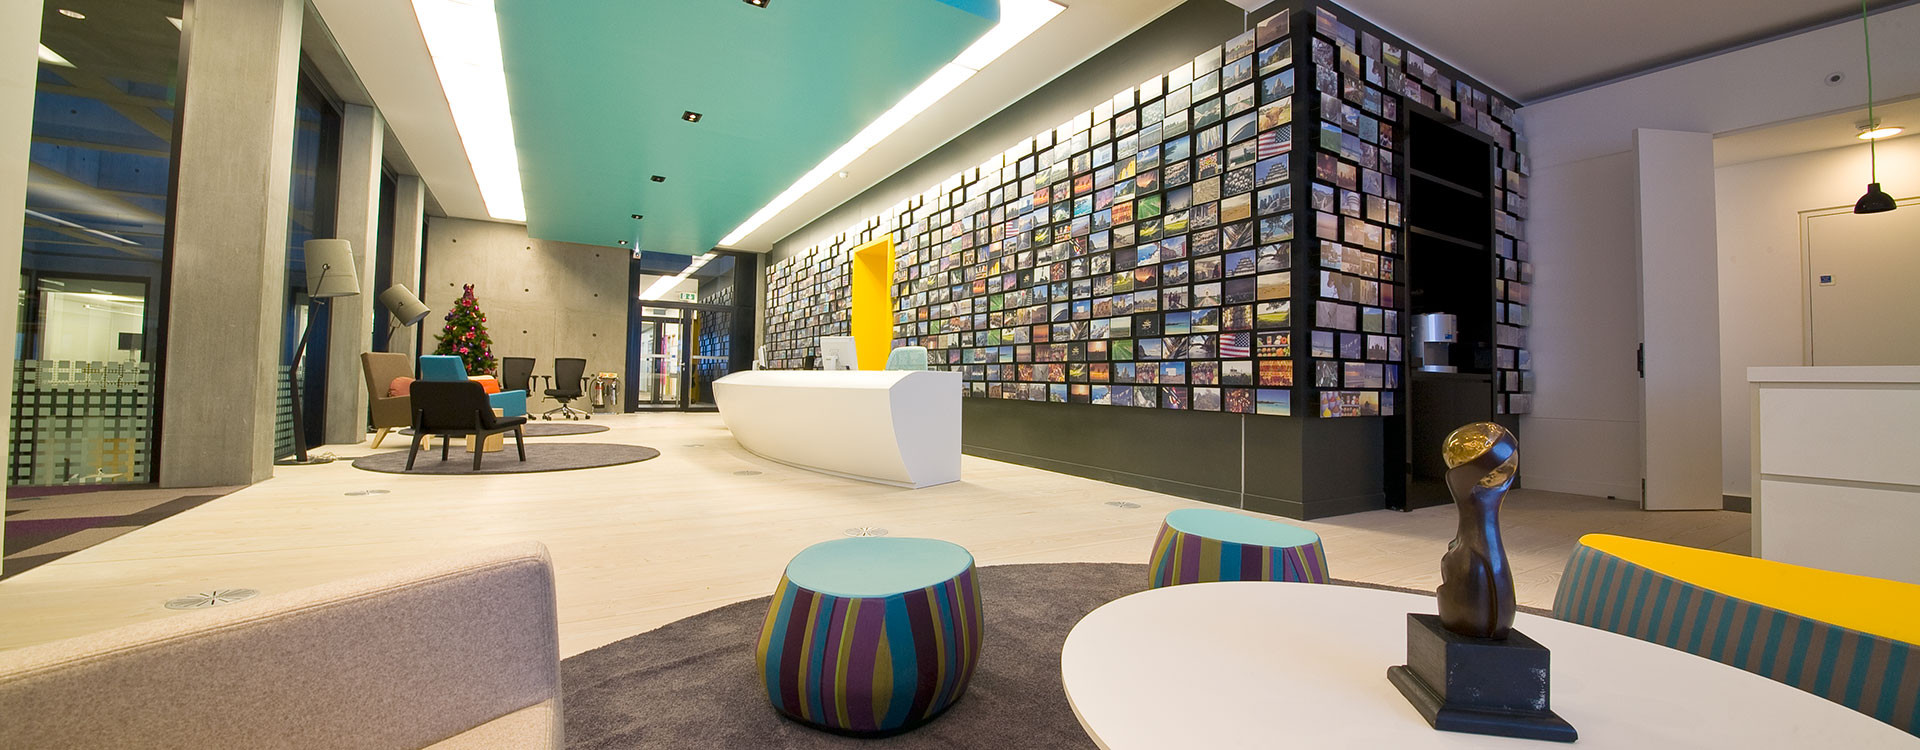 Expedia London Transforming The Workplace Case Study Signbox